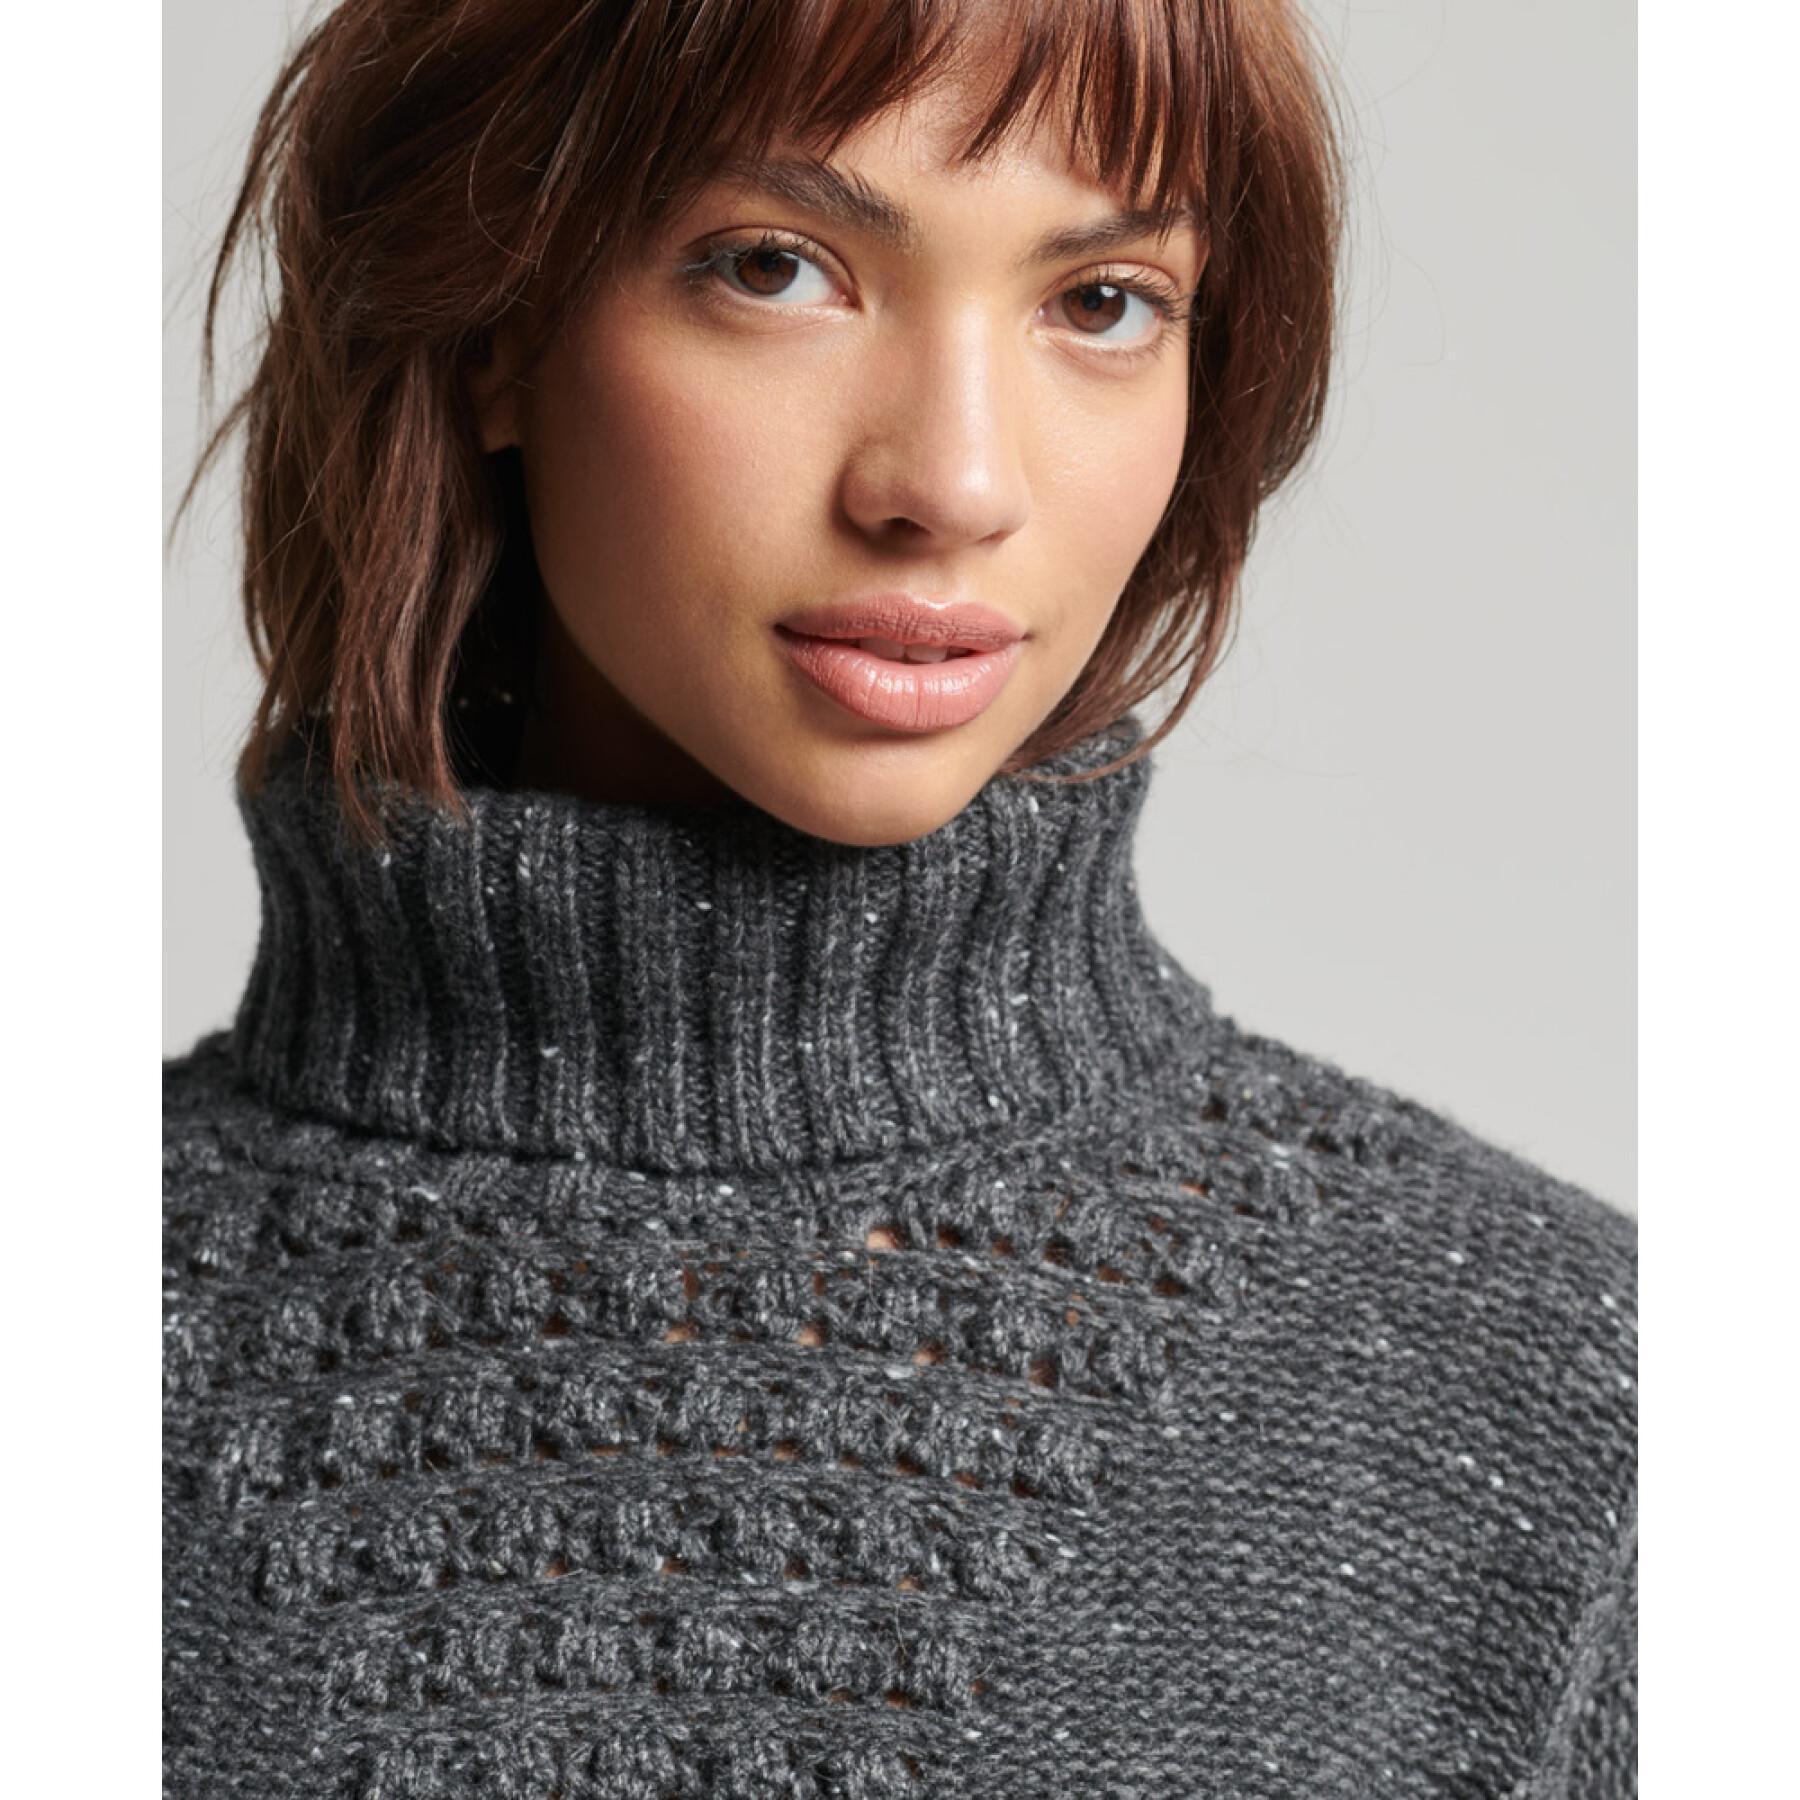 Women's thick turtleneck sweater Superdry